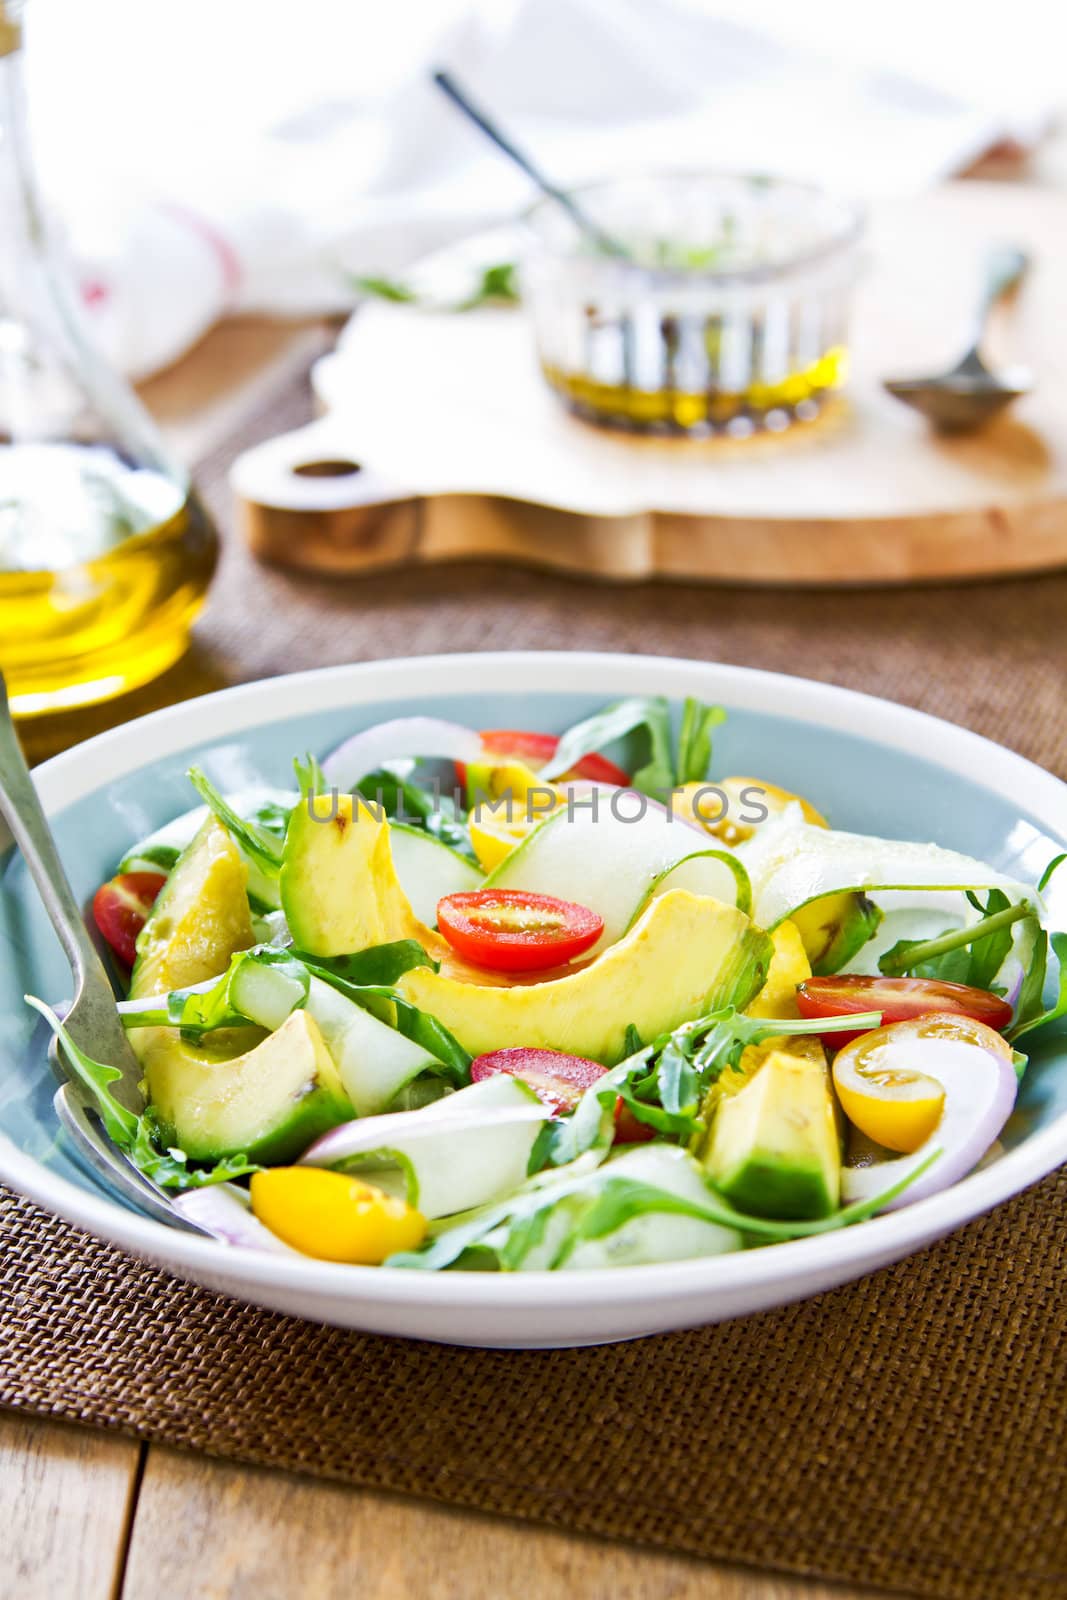 Avocado with Cucumber and Rocket salad by Balsamic dressing